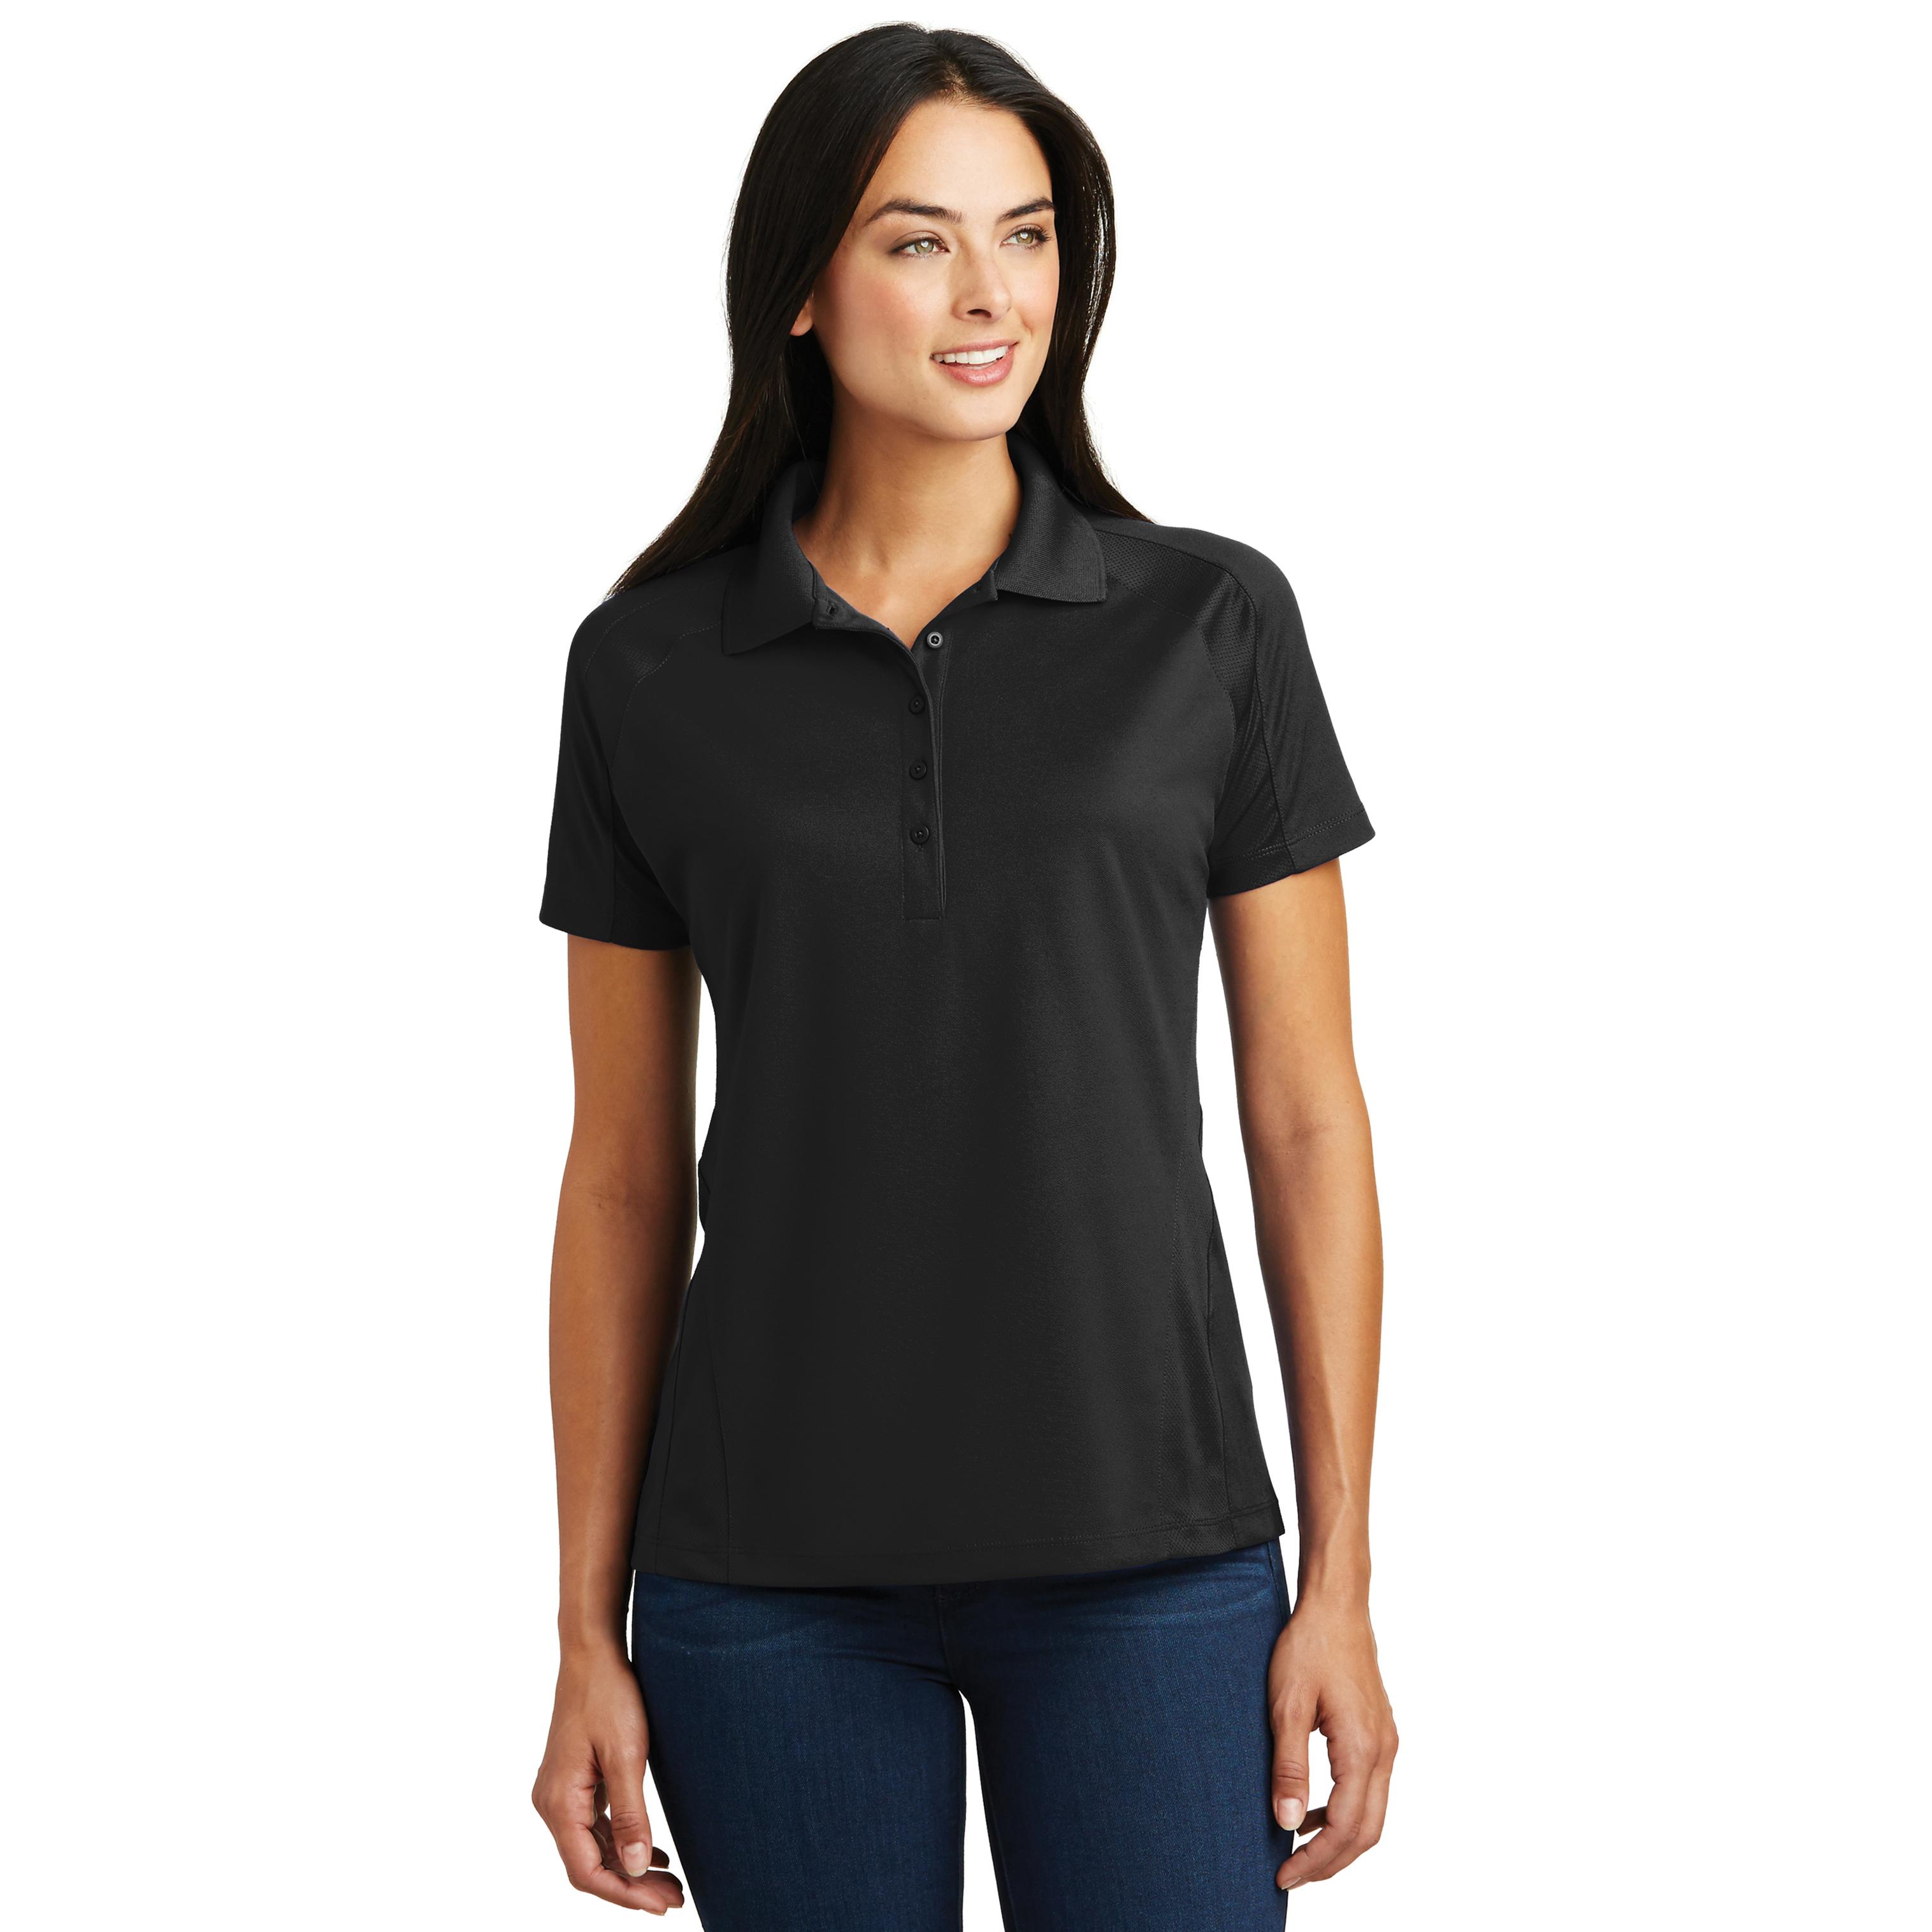 K469 Men's Dri-Mesh® Polo custom embroidered or printed with your